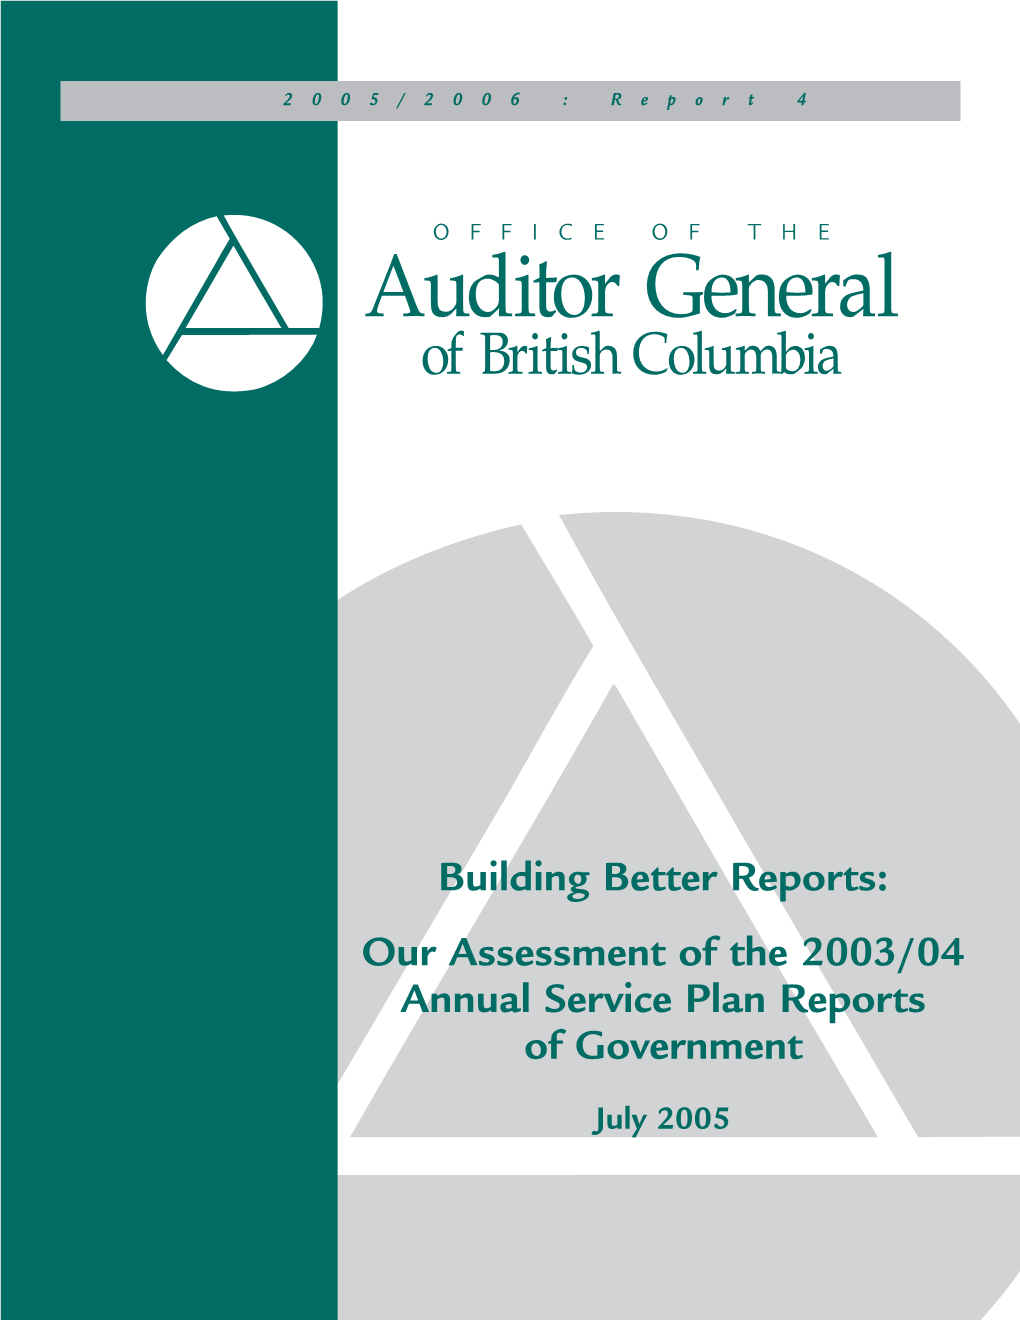 Auditor General of British Columbia | 2005/2006 Report 4 Building Better Reports Acknowledgements Assessment Team Assistant Auditor General: Susan Jennings